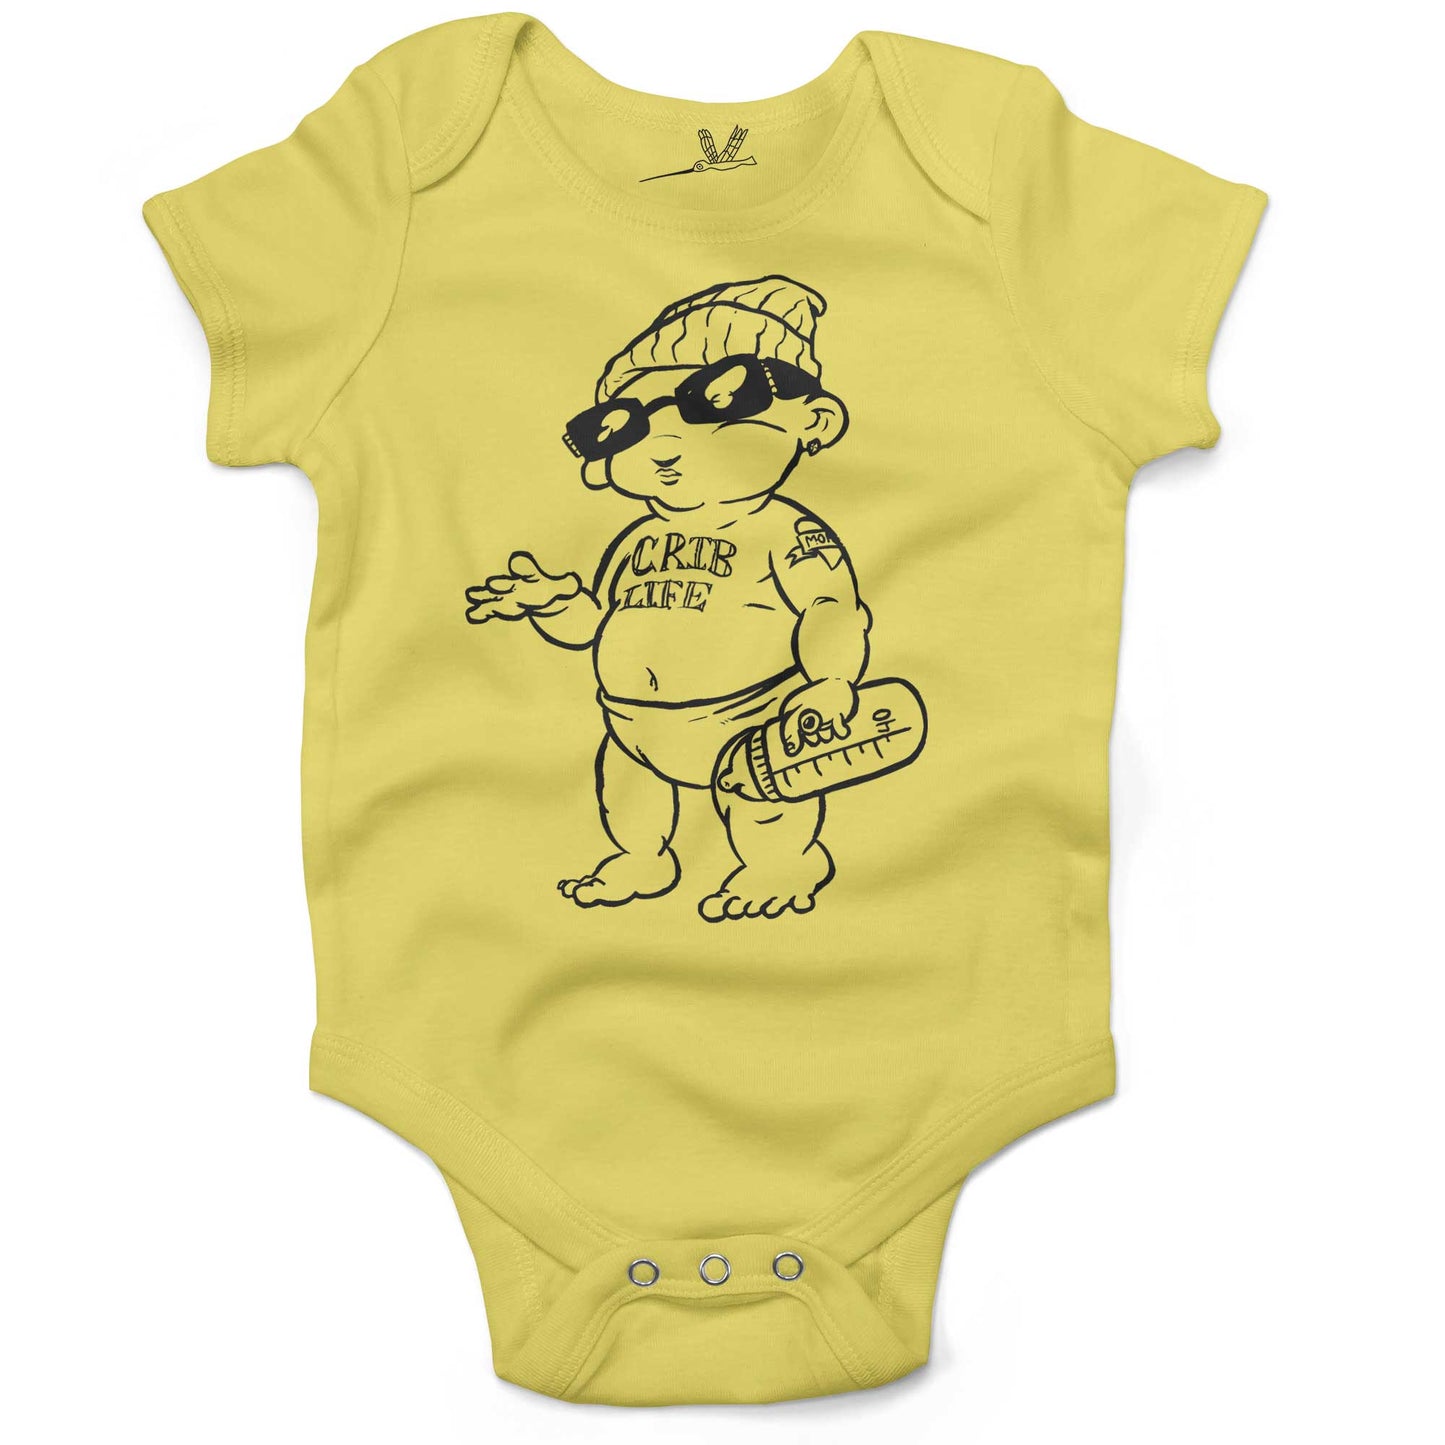 Crib Life Baby One Piece-Yellow-3-6 months